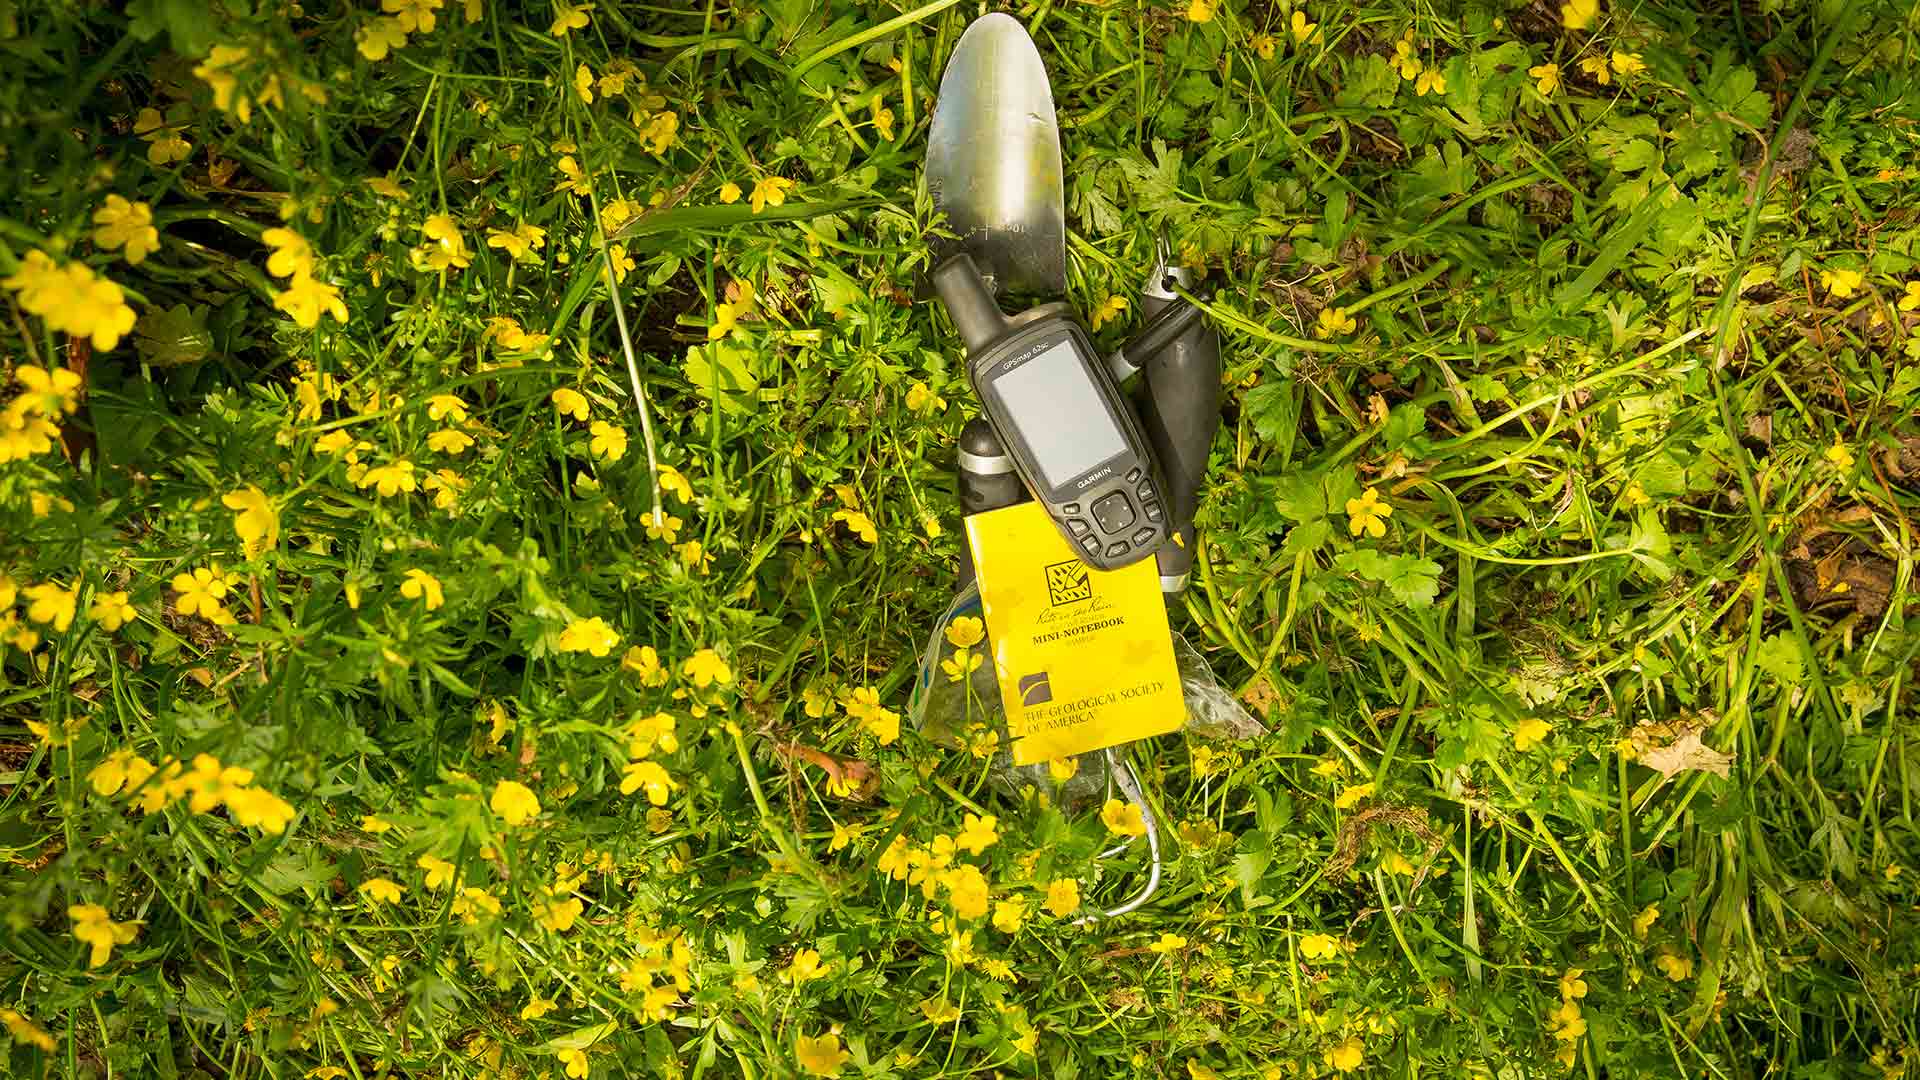 Research equipment and notebook laying in some wild flowers